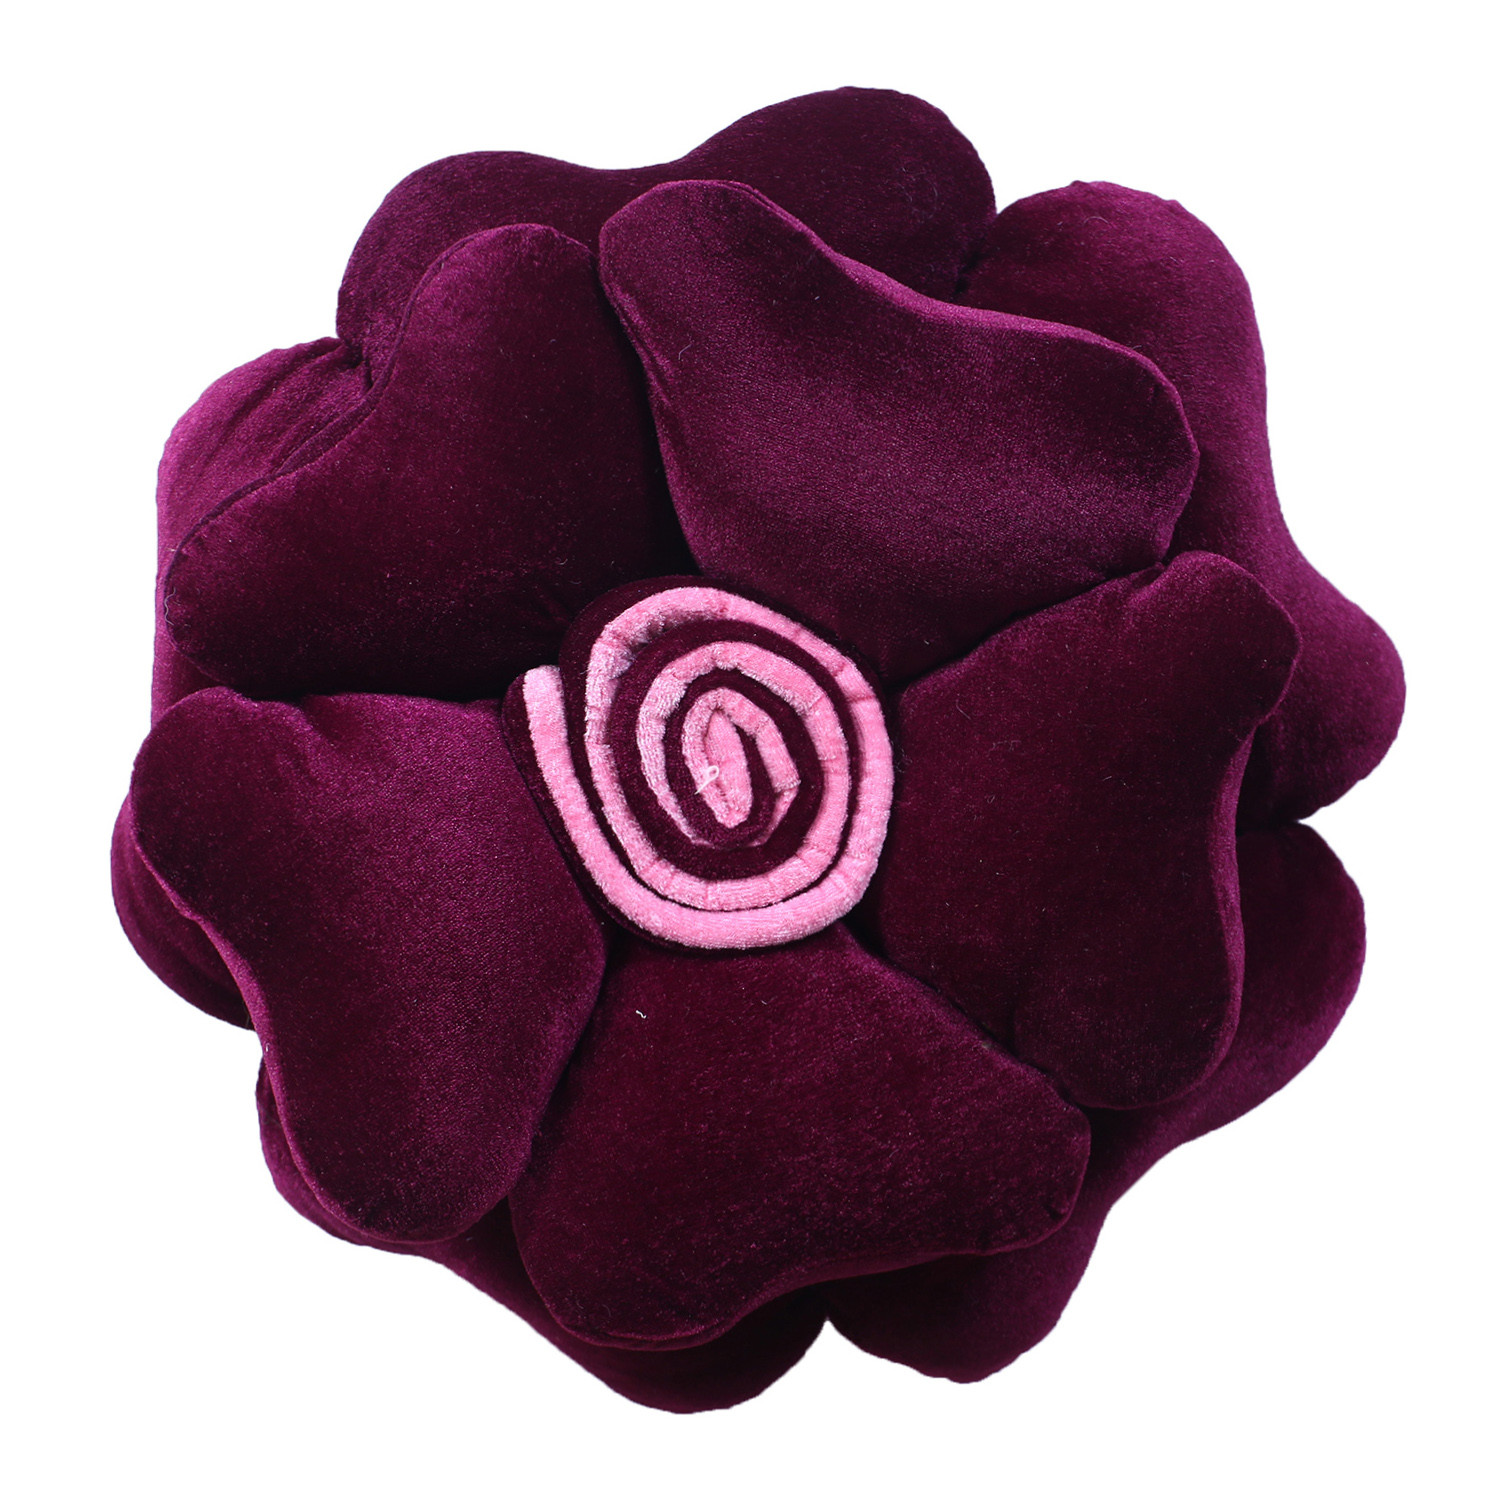 Kuber Industries Rose Flower Shaped Pair Cushion|Soft & Decorative Cushions for Living Room Bed,Sofa,Seating Area,13 Inch,(Purple)